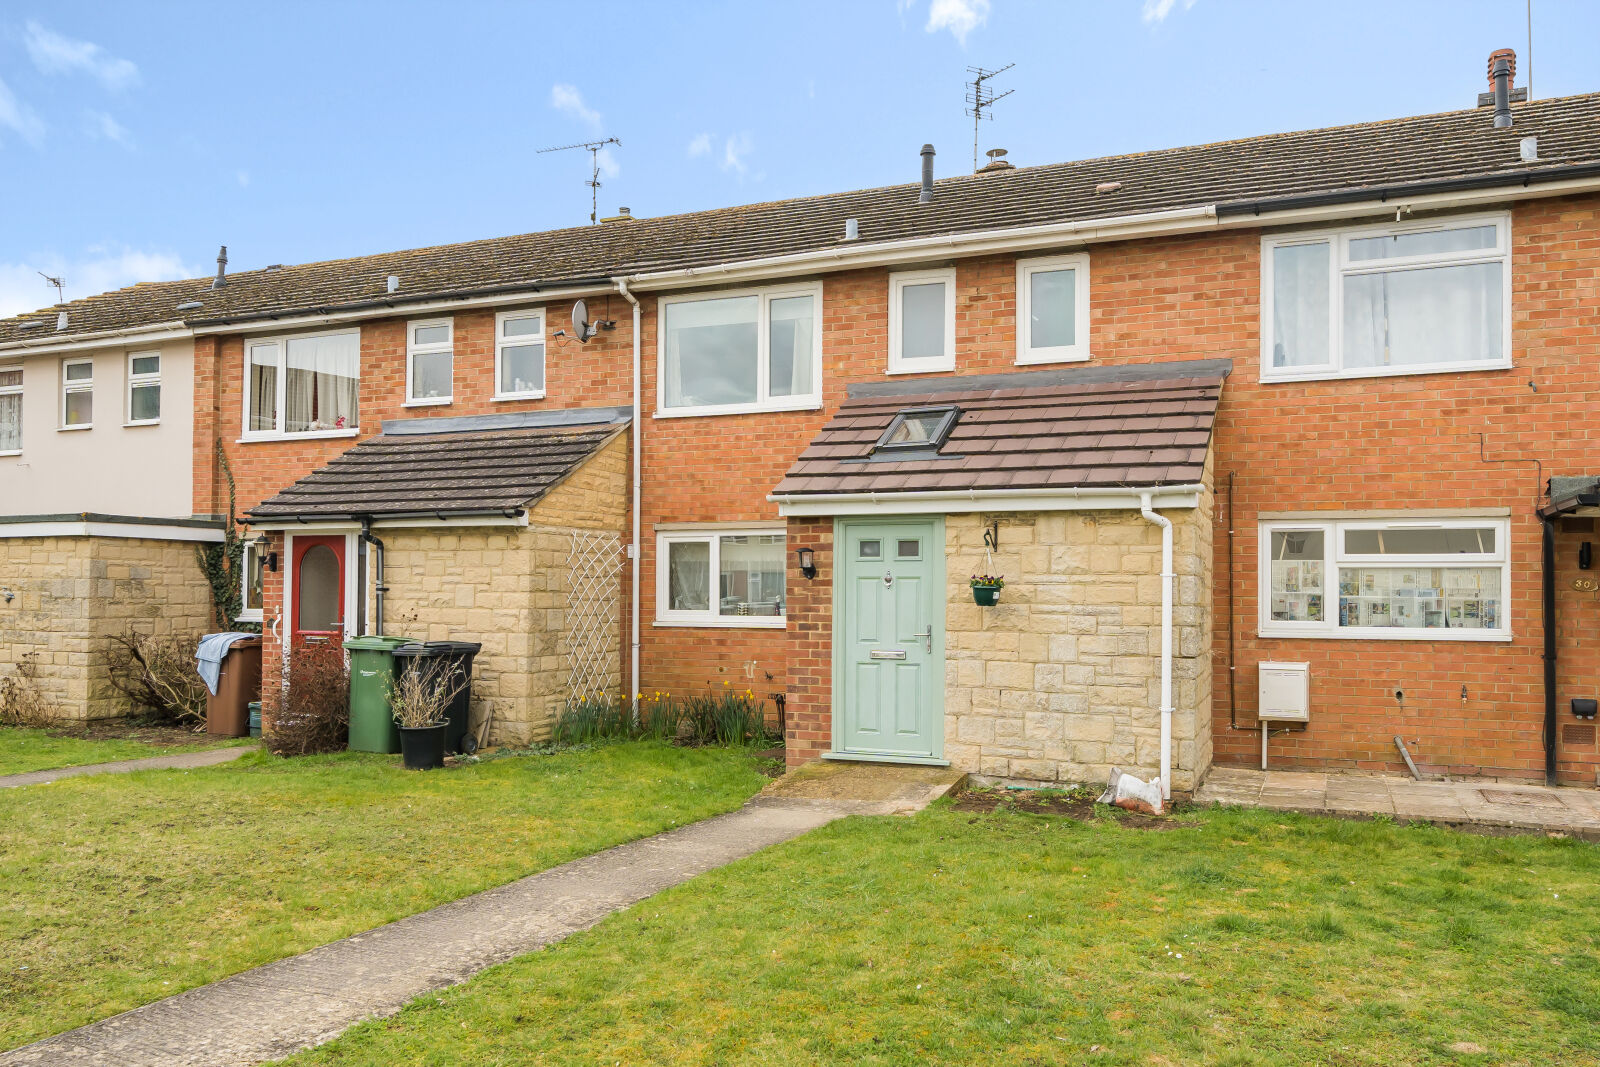 3 bedroom mid terraced house for sale Fettiplace Road, Marcham, OX13, main image